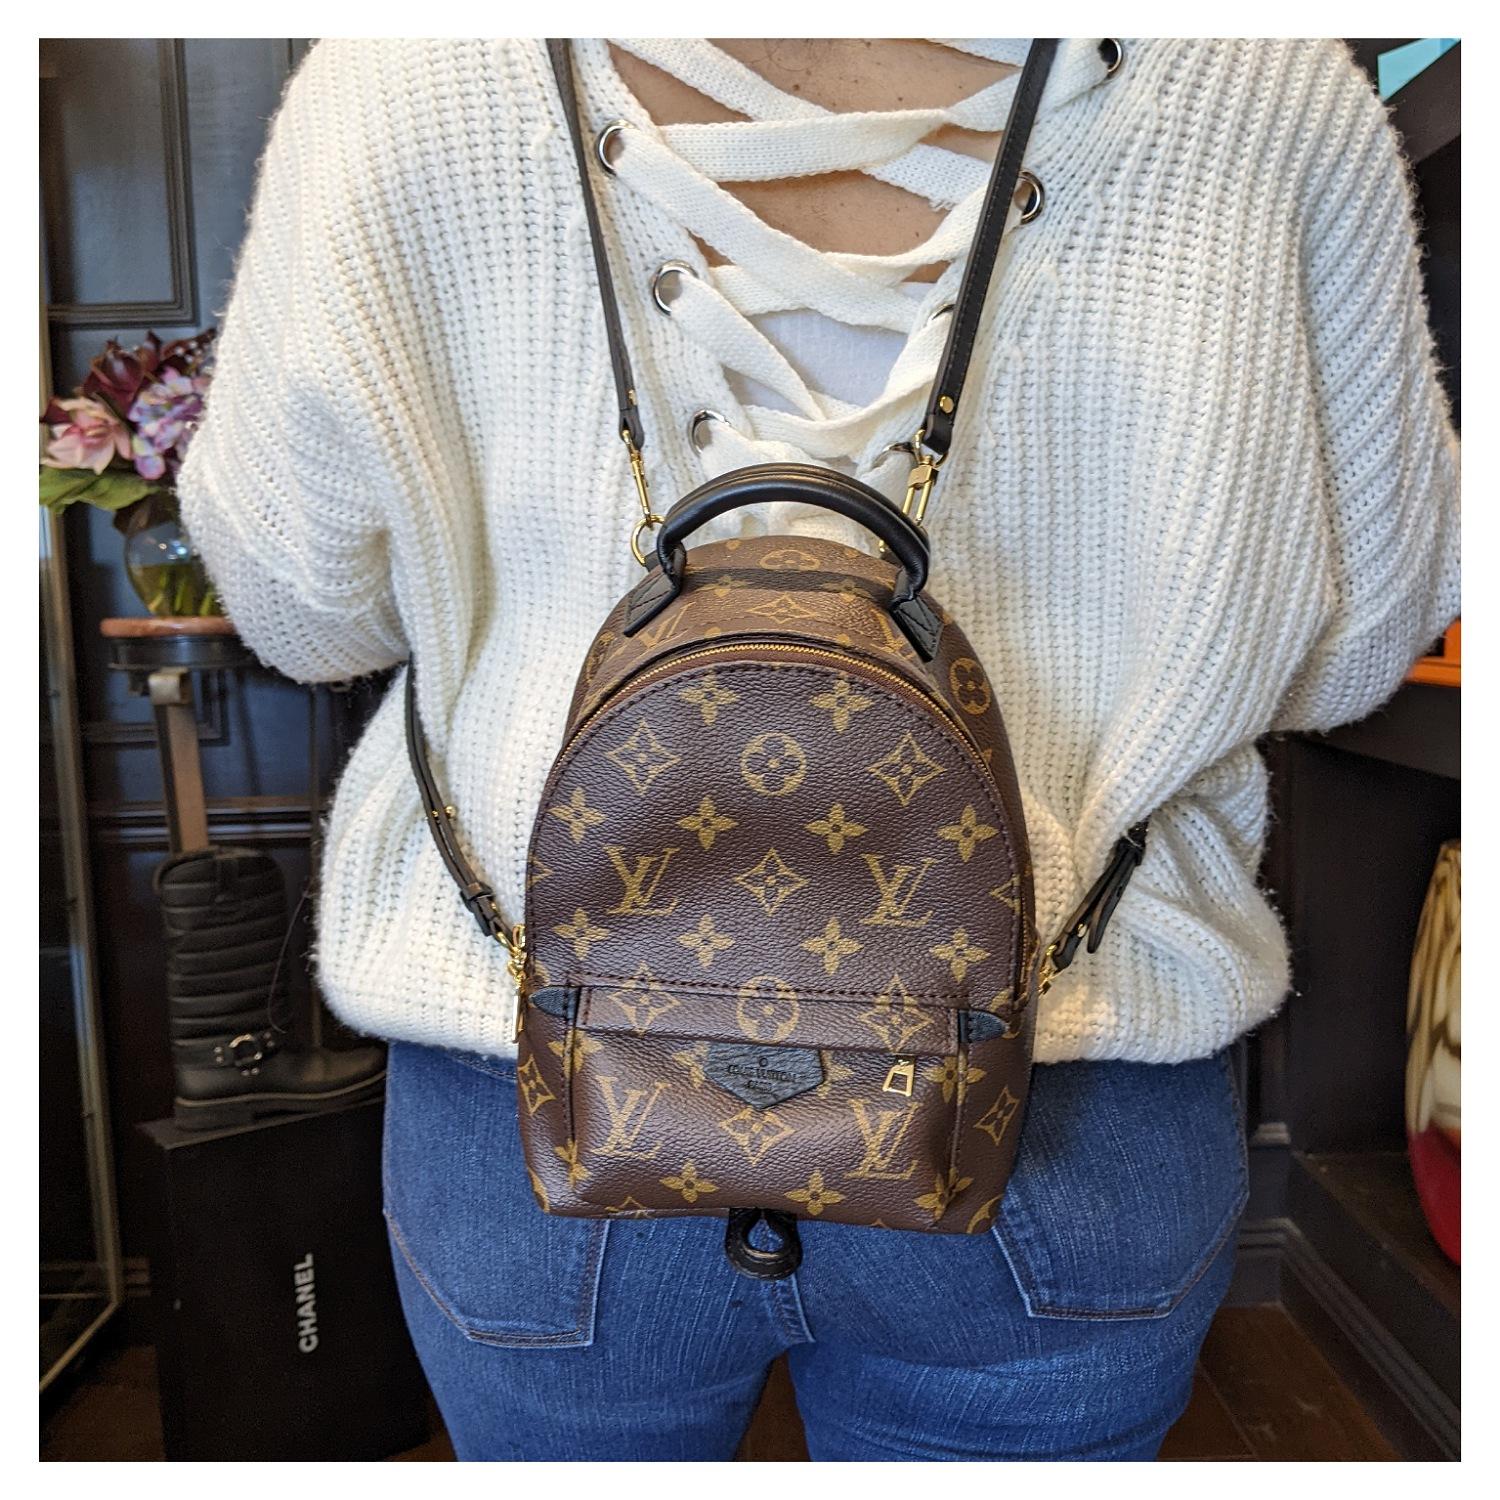 This adorable backpack from LV was originally introduced for the Cruise 2016 collection and has made a huge splash. It is ideal for city dwellers. The bag is functional as well as stylish with a sporty shape. The bag features the iconic monogram